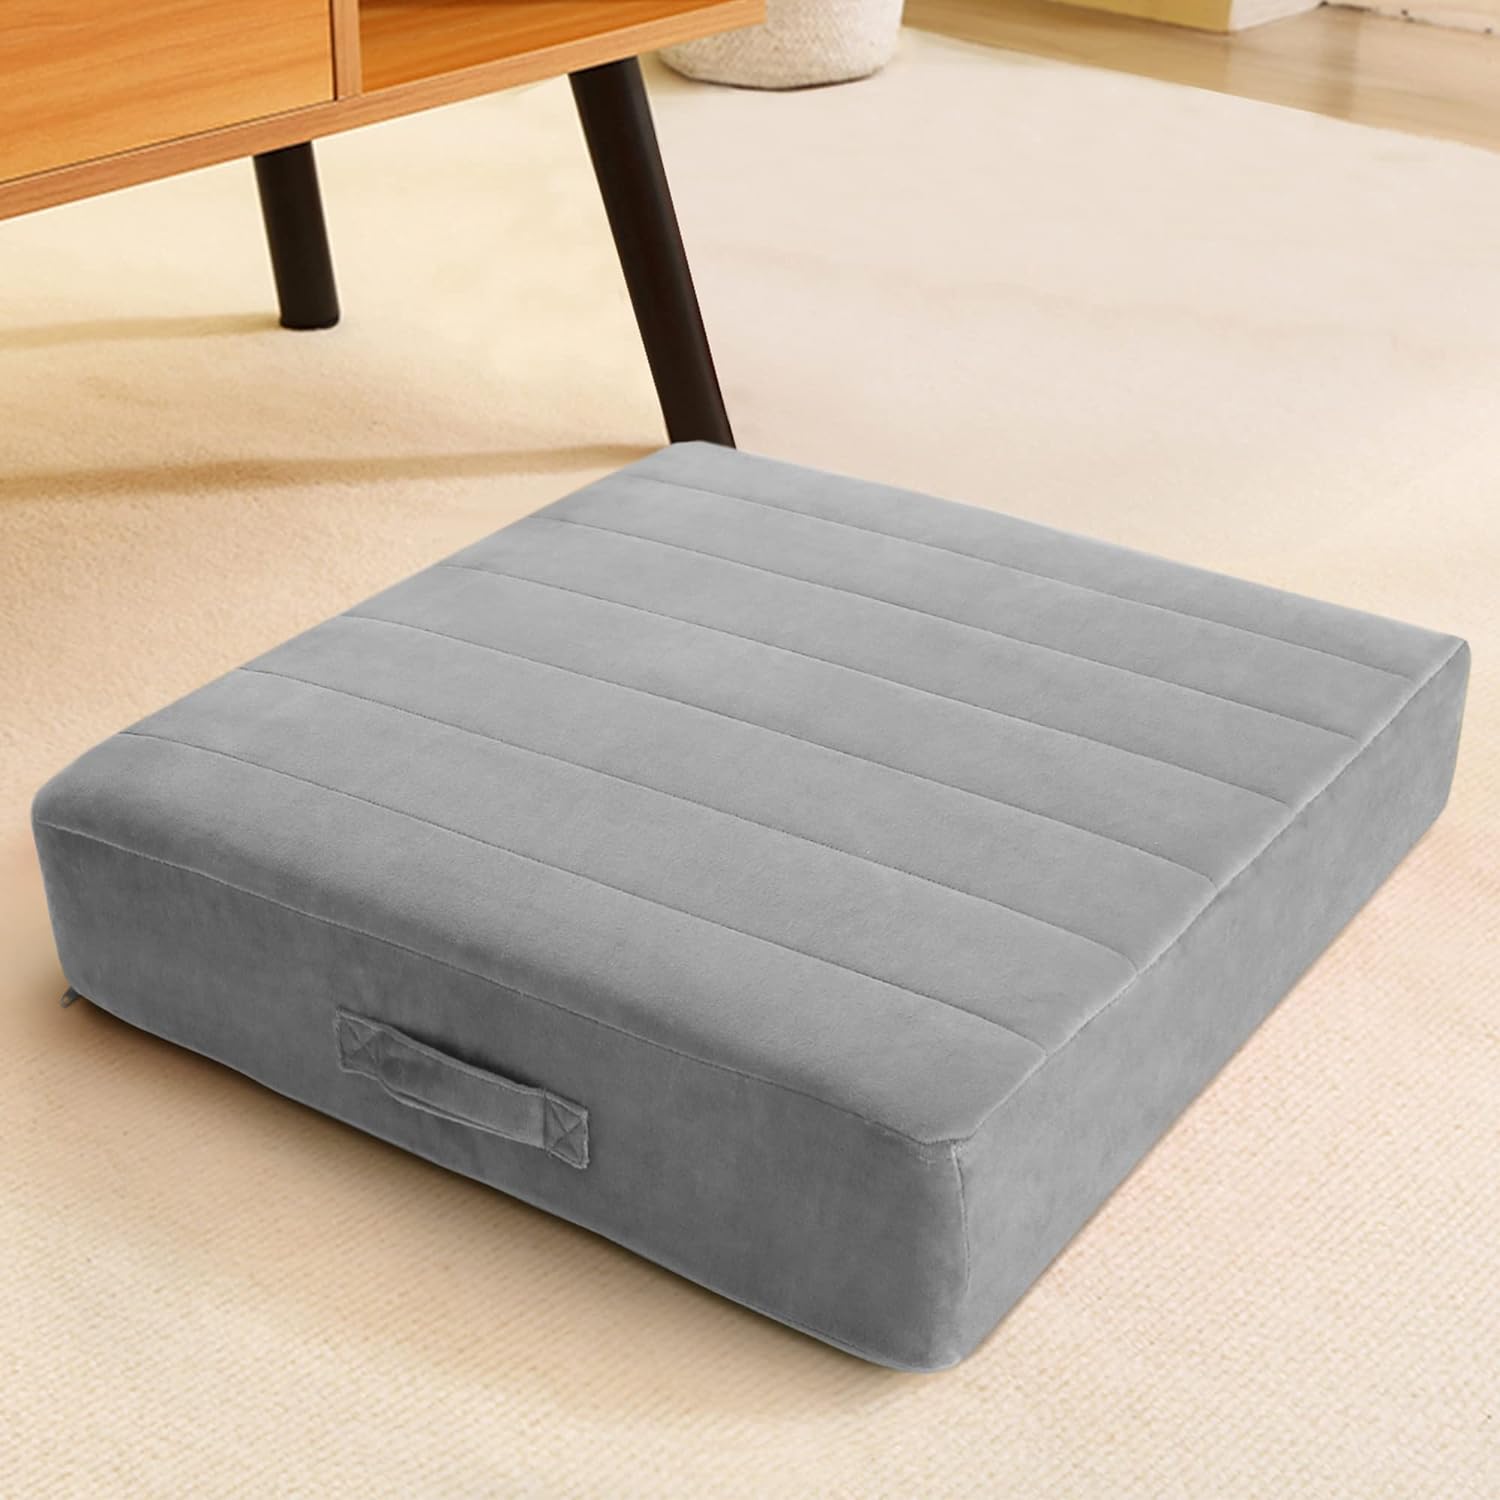 MeMoreCool Square Floor Pillow Seating for Adults Kids, Large Meditation Cushion Floor Pillow with Thick Foam & Soft Tufted Cover, Washable Big Pillow Seat Floor Cushion for Sitting Yoga, 22" Grey